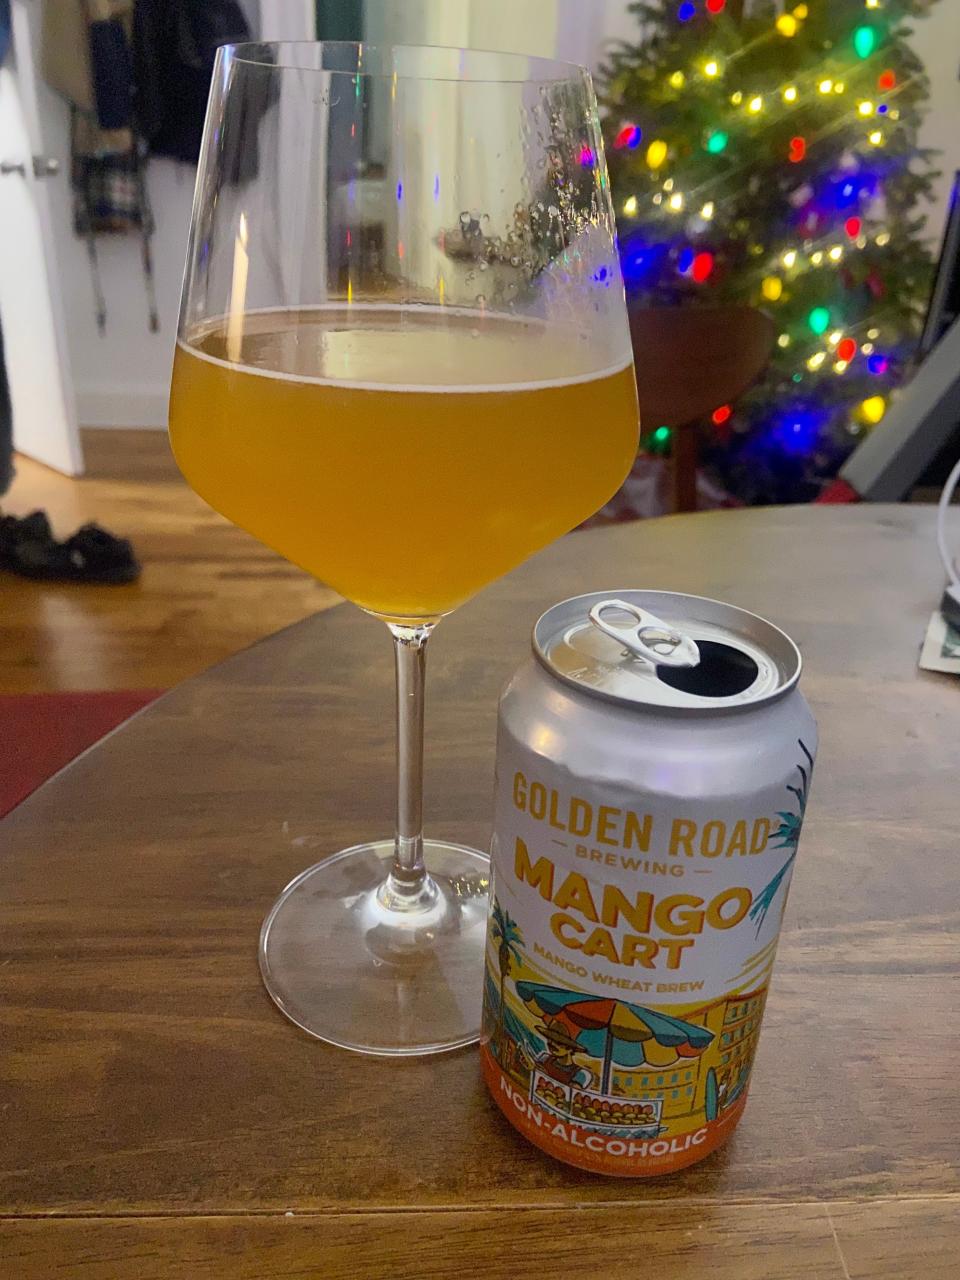 Mango Cart nonalcoholic beer can and glass